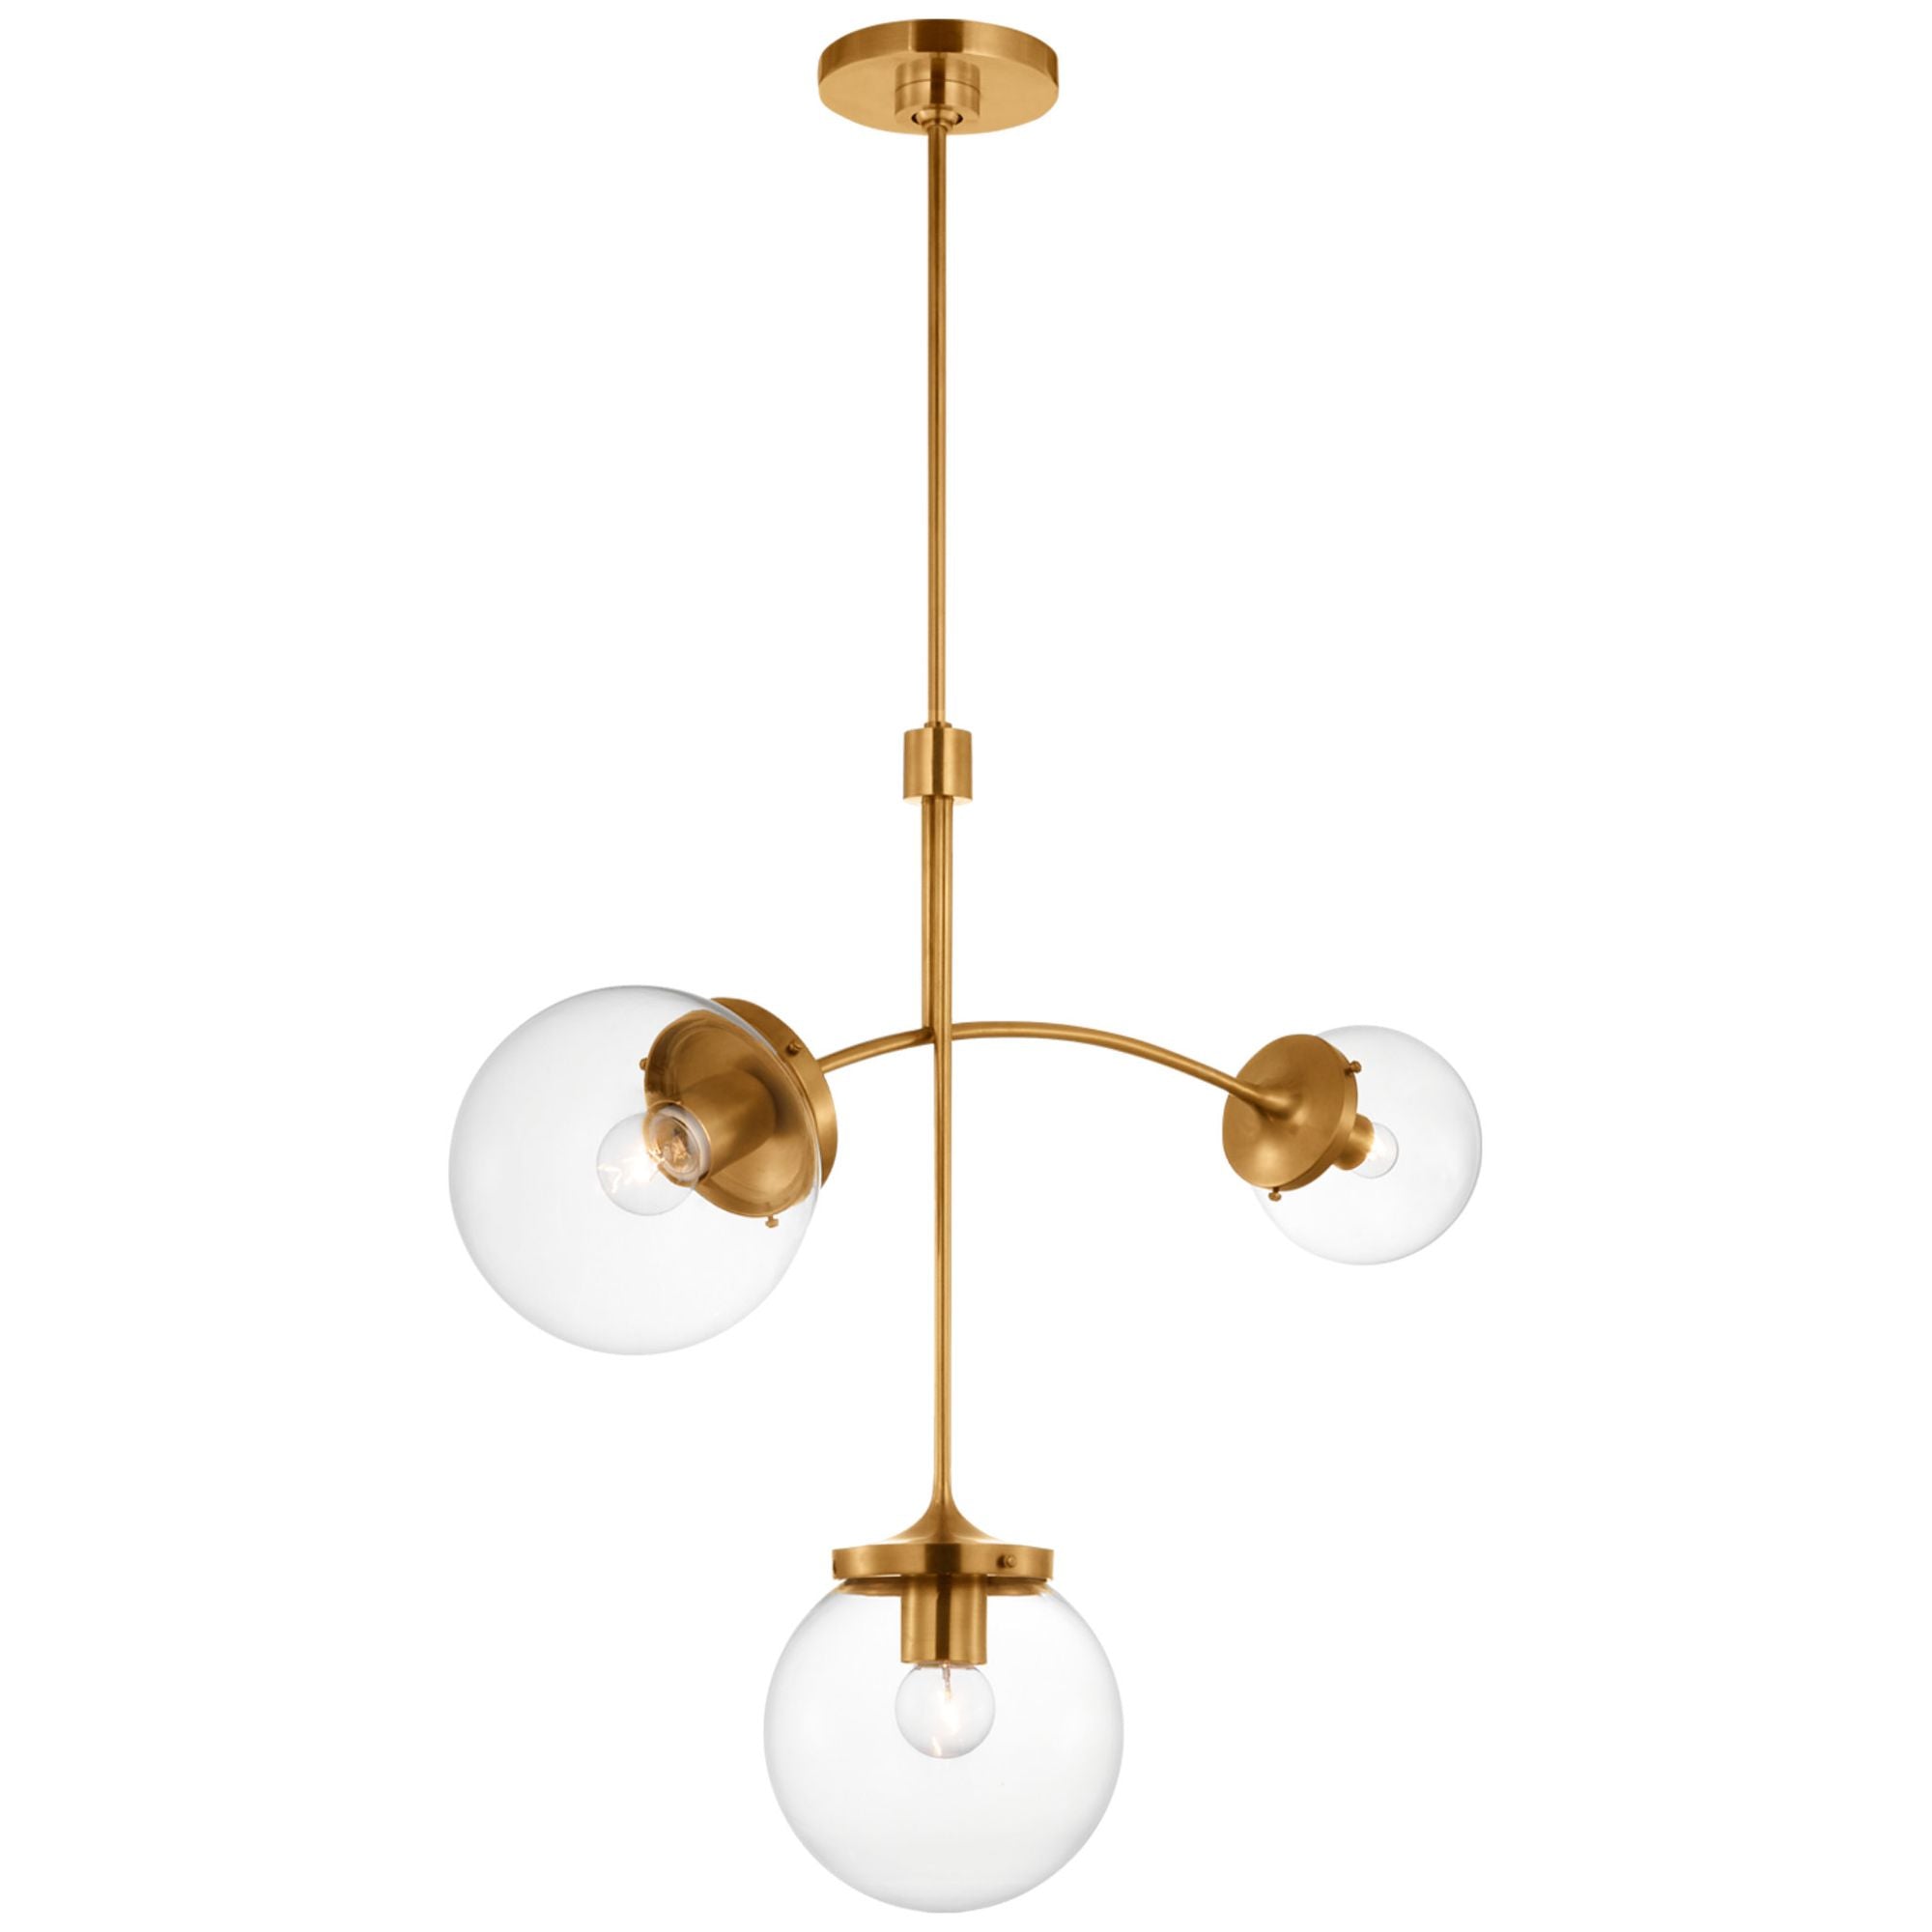 kate spade new york Prescott Small Chandelier in Soft Brass with Clear Glass